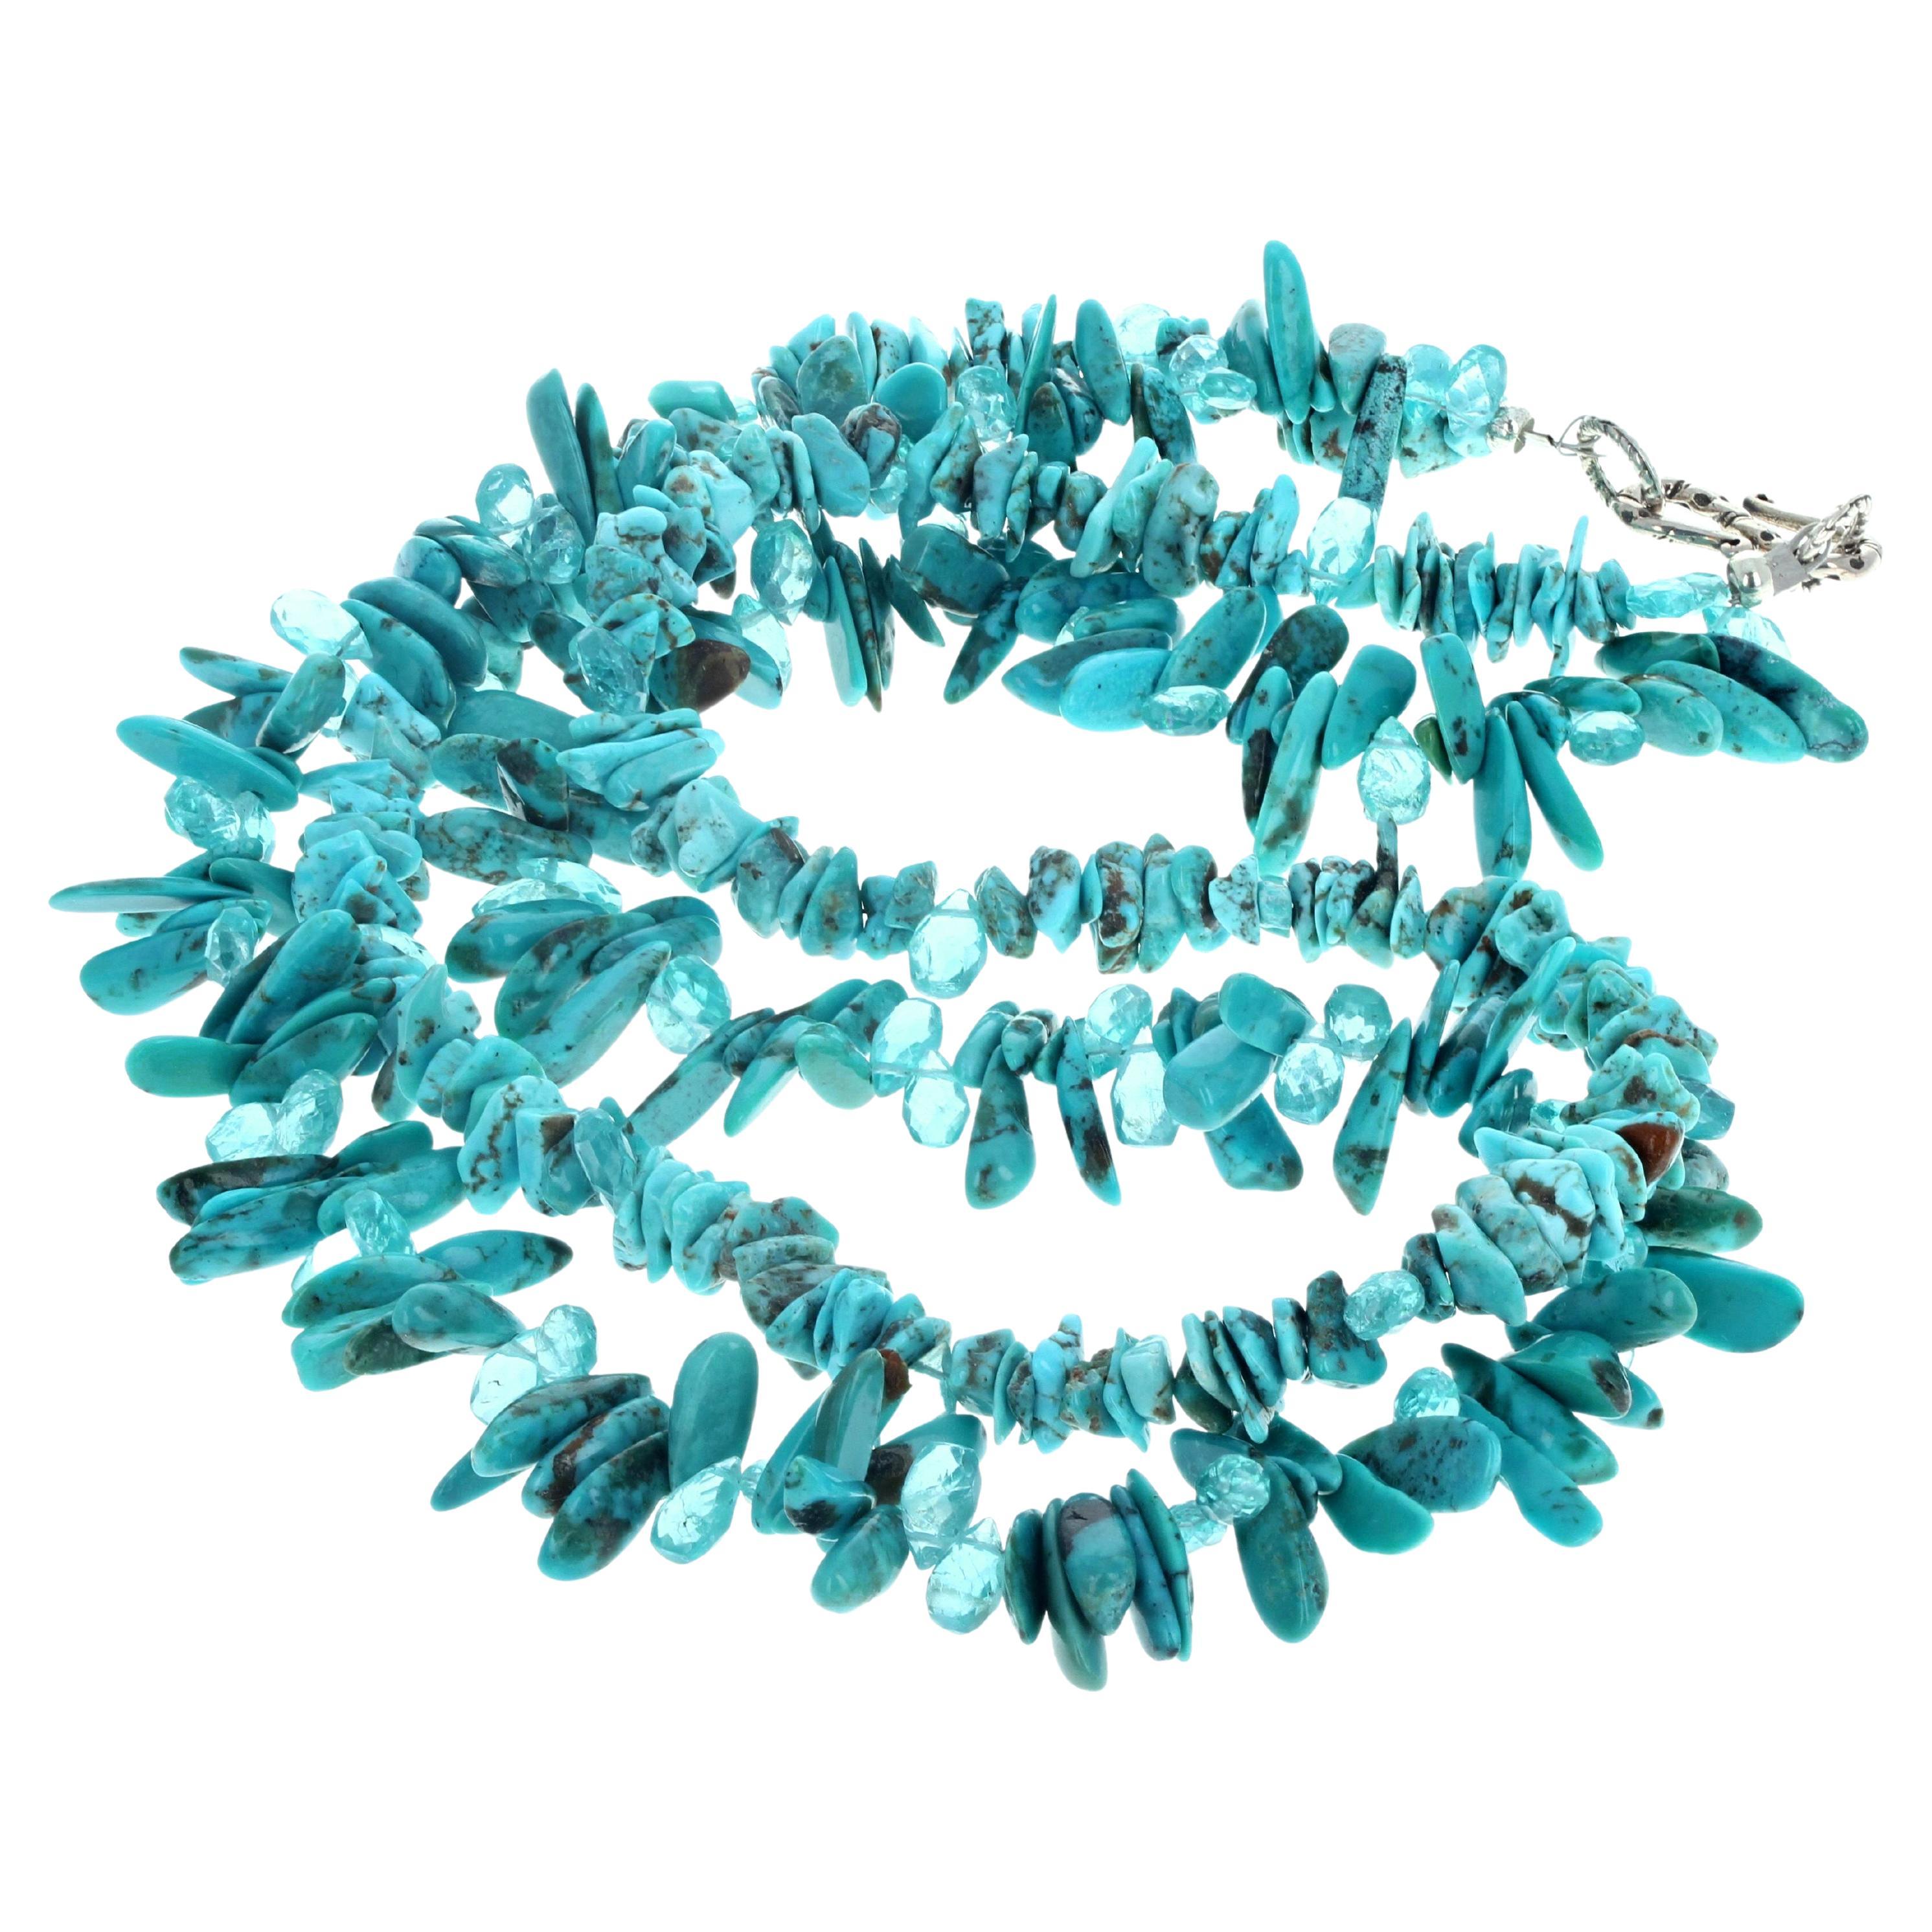 AJD Fascinating Polished Chips of Natural Blue Turquoise Necklace